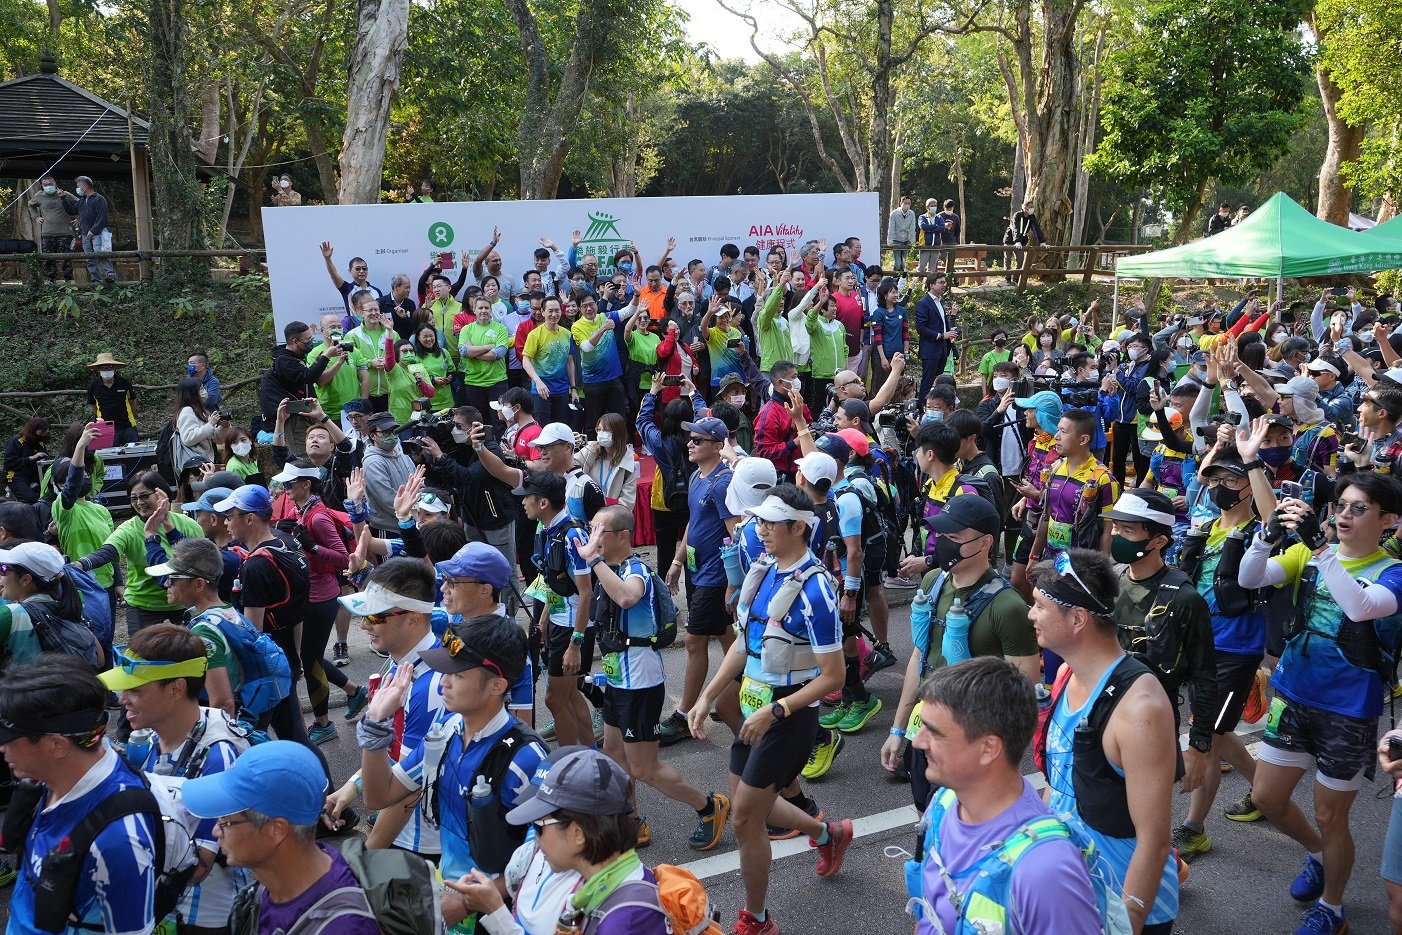 Roughly 1,600 people set off in Pak Tam Chung, Sai Kung, for the Oxfam Trailwalker. Participants will need to complete the 100 km trail along the MacLehose Trail and other trails within 48 hours.